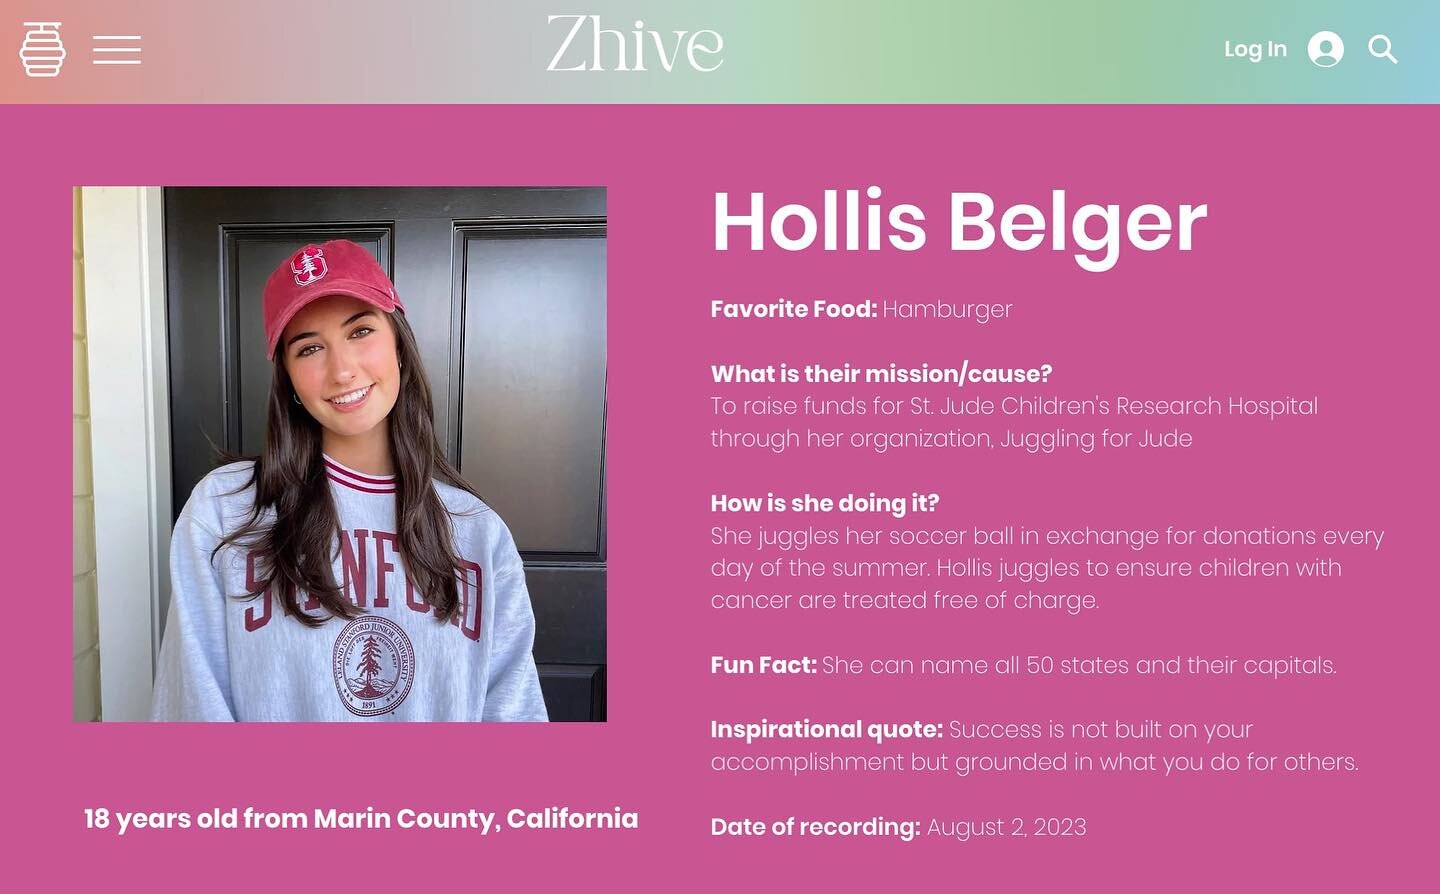 Thanks so much to @zhivemedia for featuring me and on their media platform sharing stories of young women activists, artists, advocates, and entrepreneurs! I&rsquo;m honored to be a part of the Zhive community and to share my passion for pediatric ca